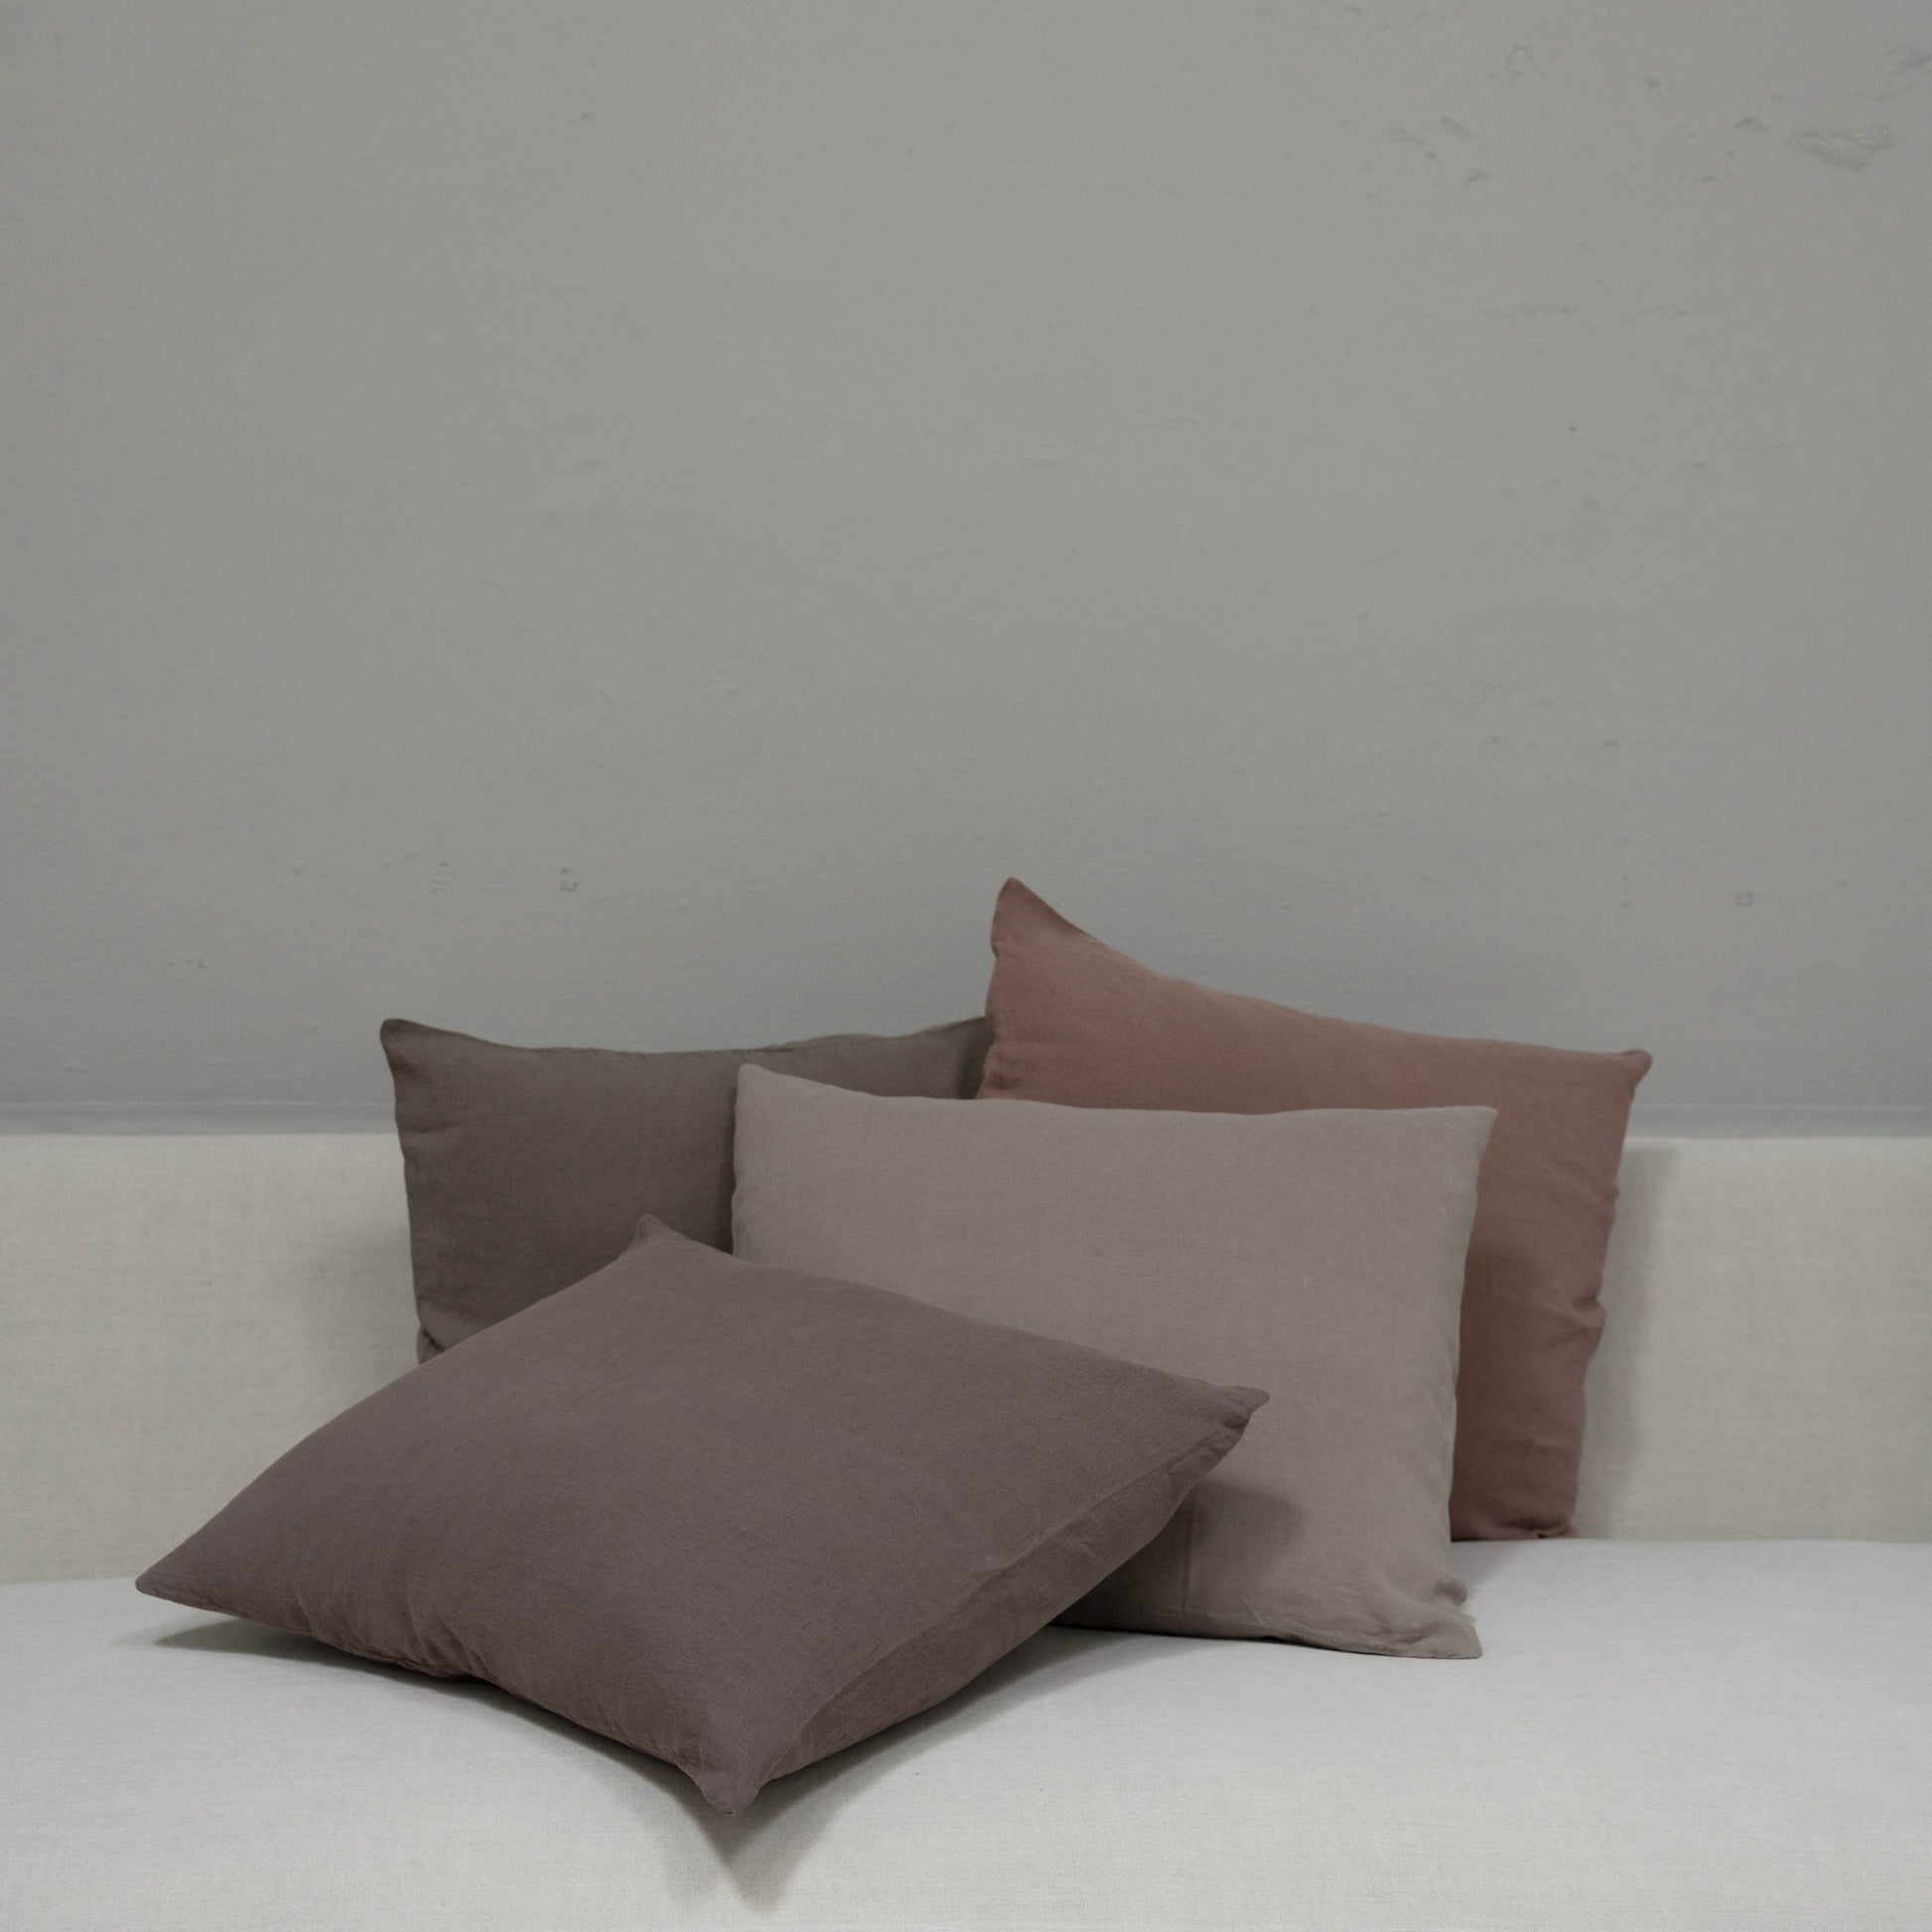 Society Limonta cushions in to quality linen